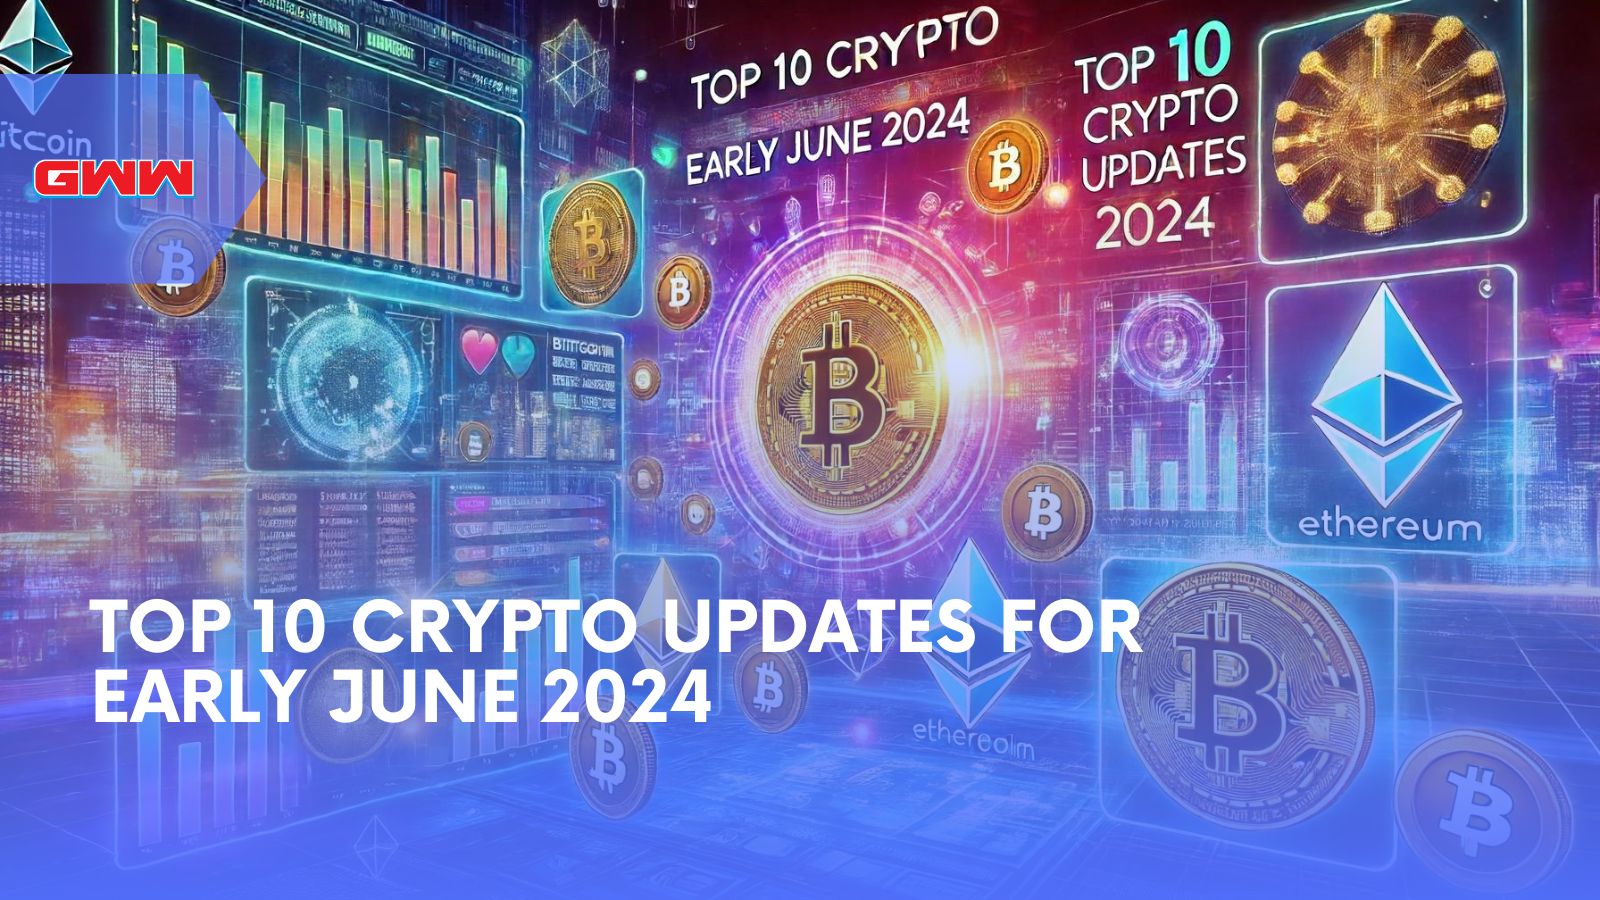 Top 10 Crypto Updates for Early June 2024